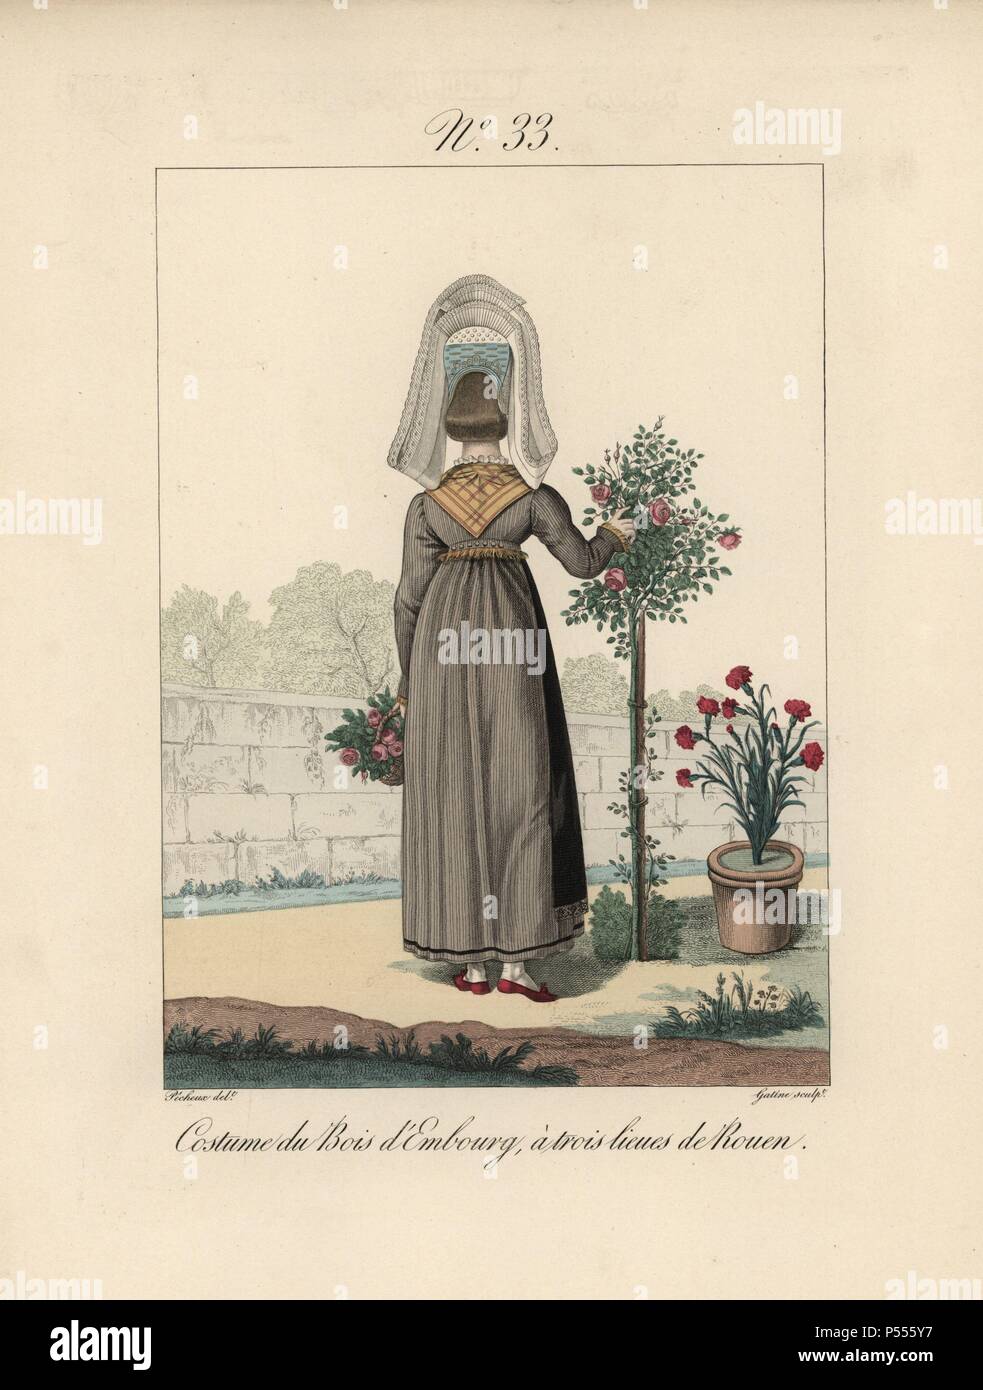 Costume of Bois d'Embourg. Rear view of the tall bavolet bonnet with lace tails. The model is the mother of the girl in plate 32. Hand-colored fashion plate illustration by Benoit Pecheux engraved by Gatine from Louis-Marie Lante's 'Costumes des femmes du Pays de Caux,' 1827/1885. With their tall Alsation lace hats, the women of Caux and Normandy were famous for the elegance and style. Stock Photo